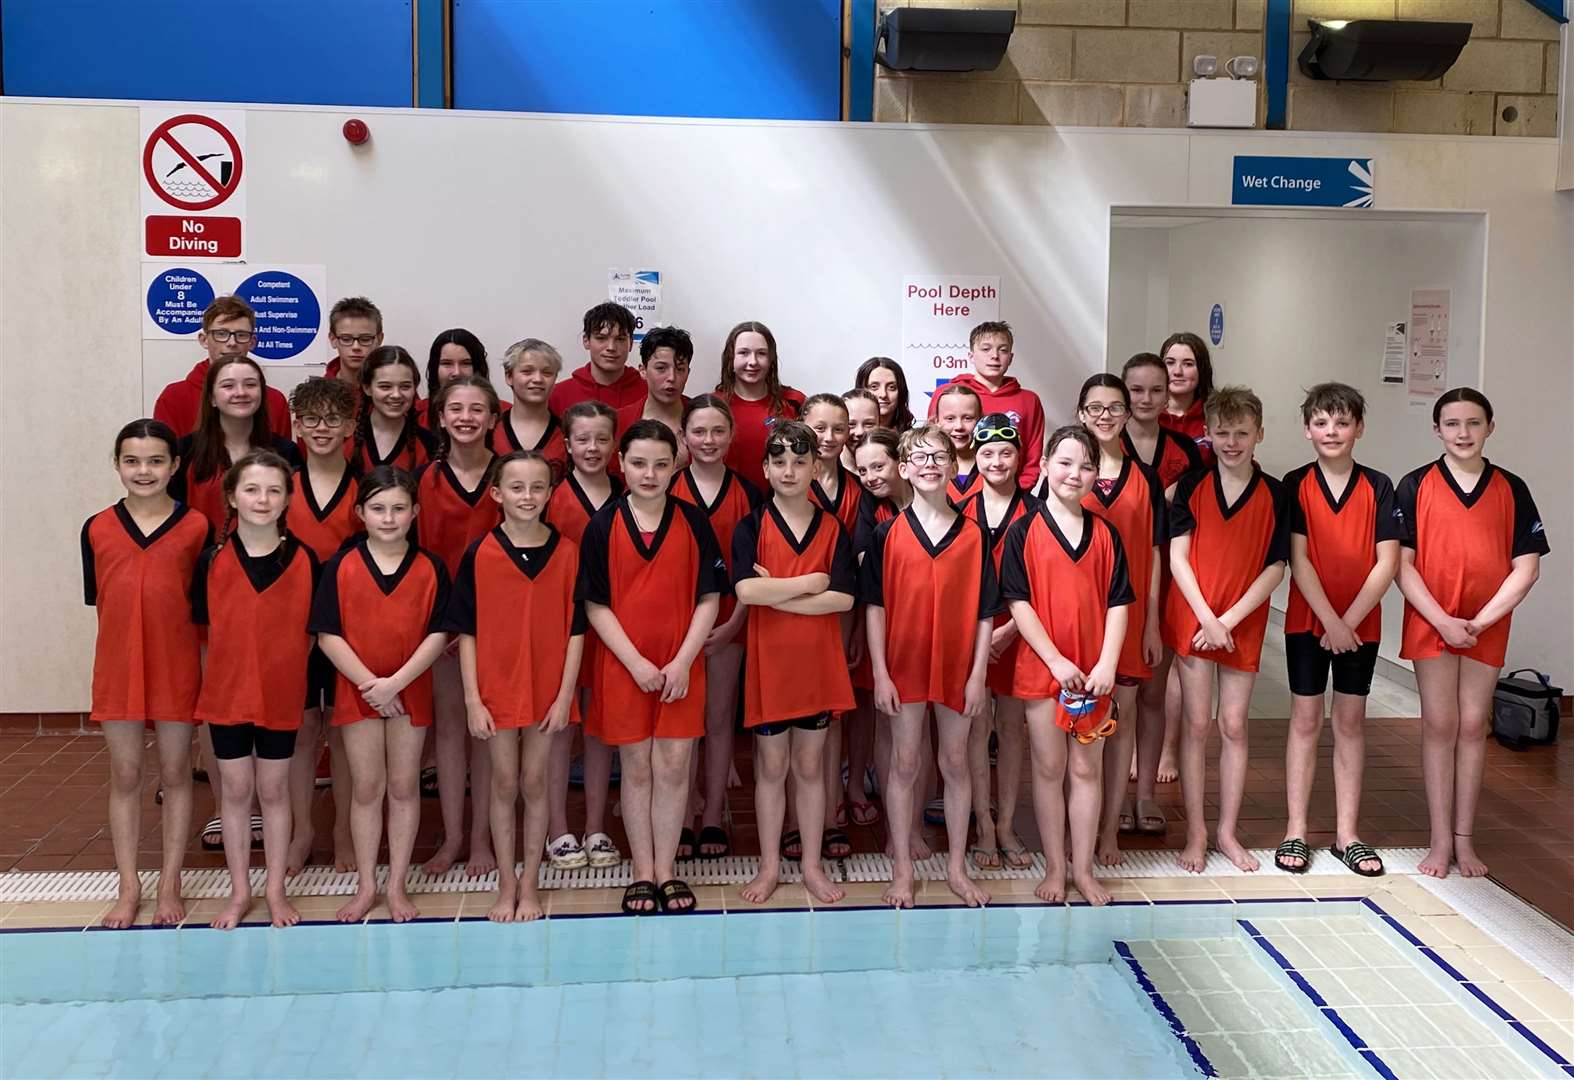 Thurso team leading the way in Pentaqua swimming competition pic